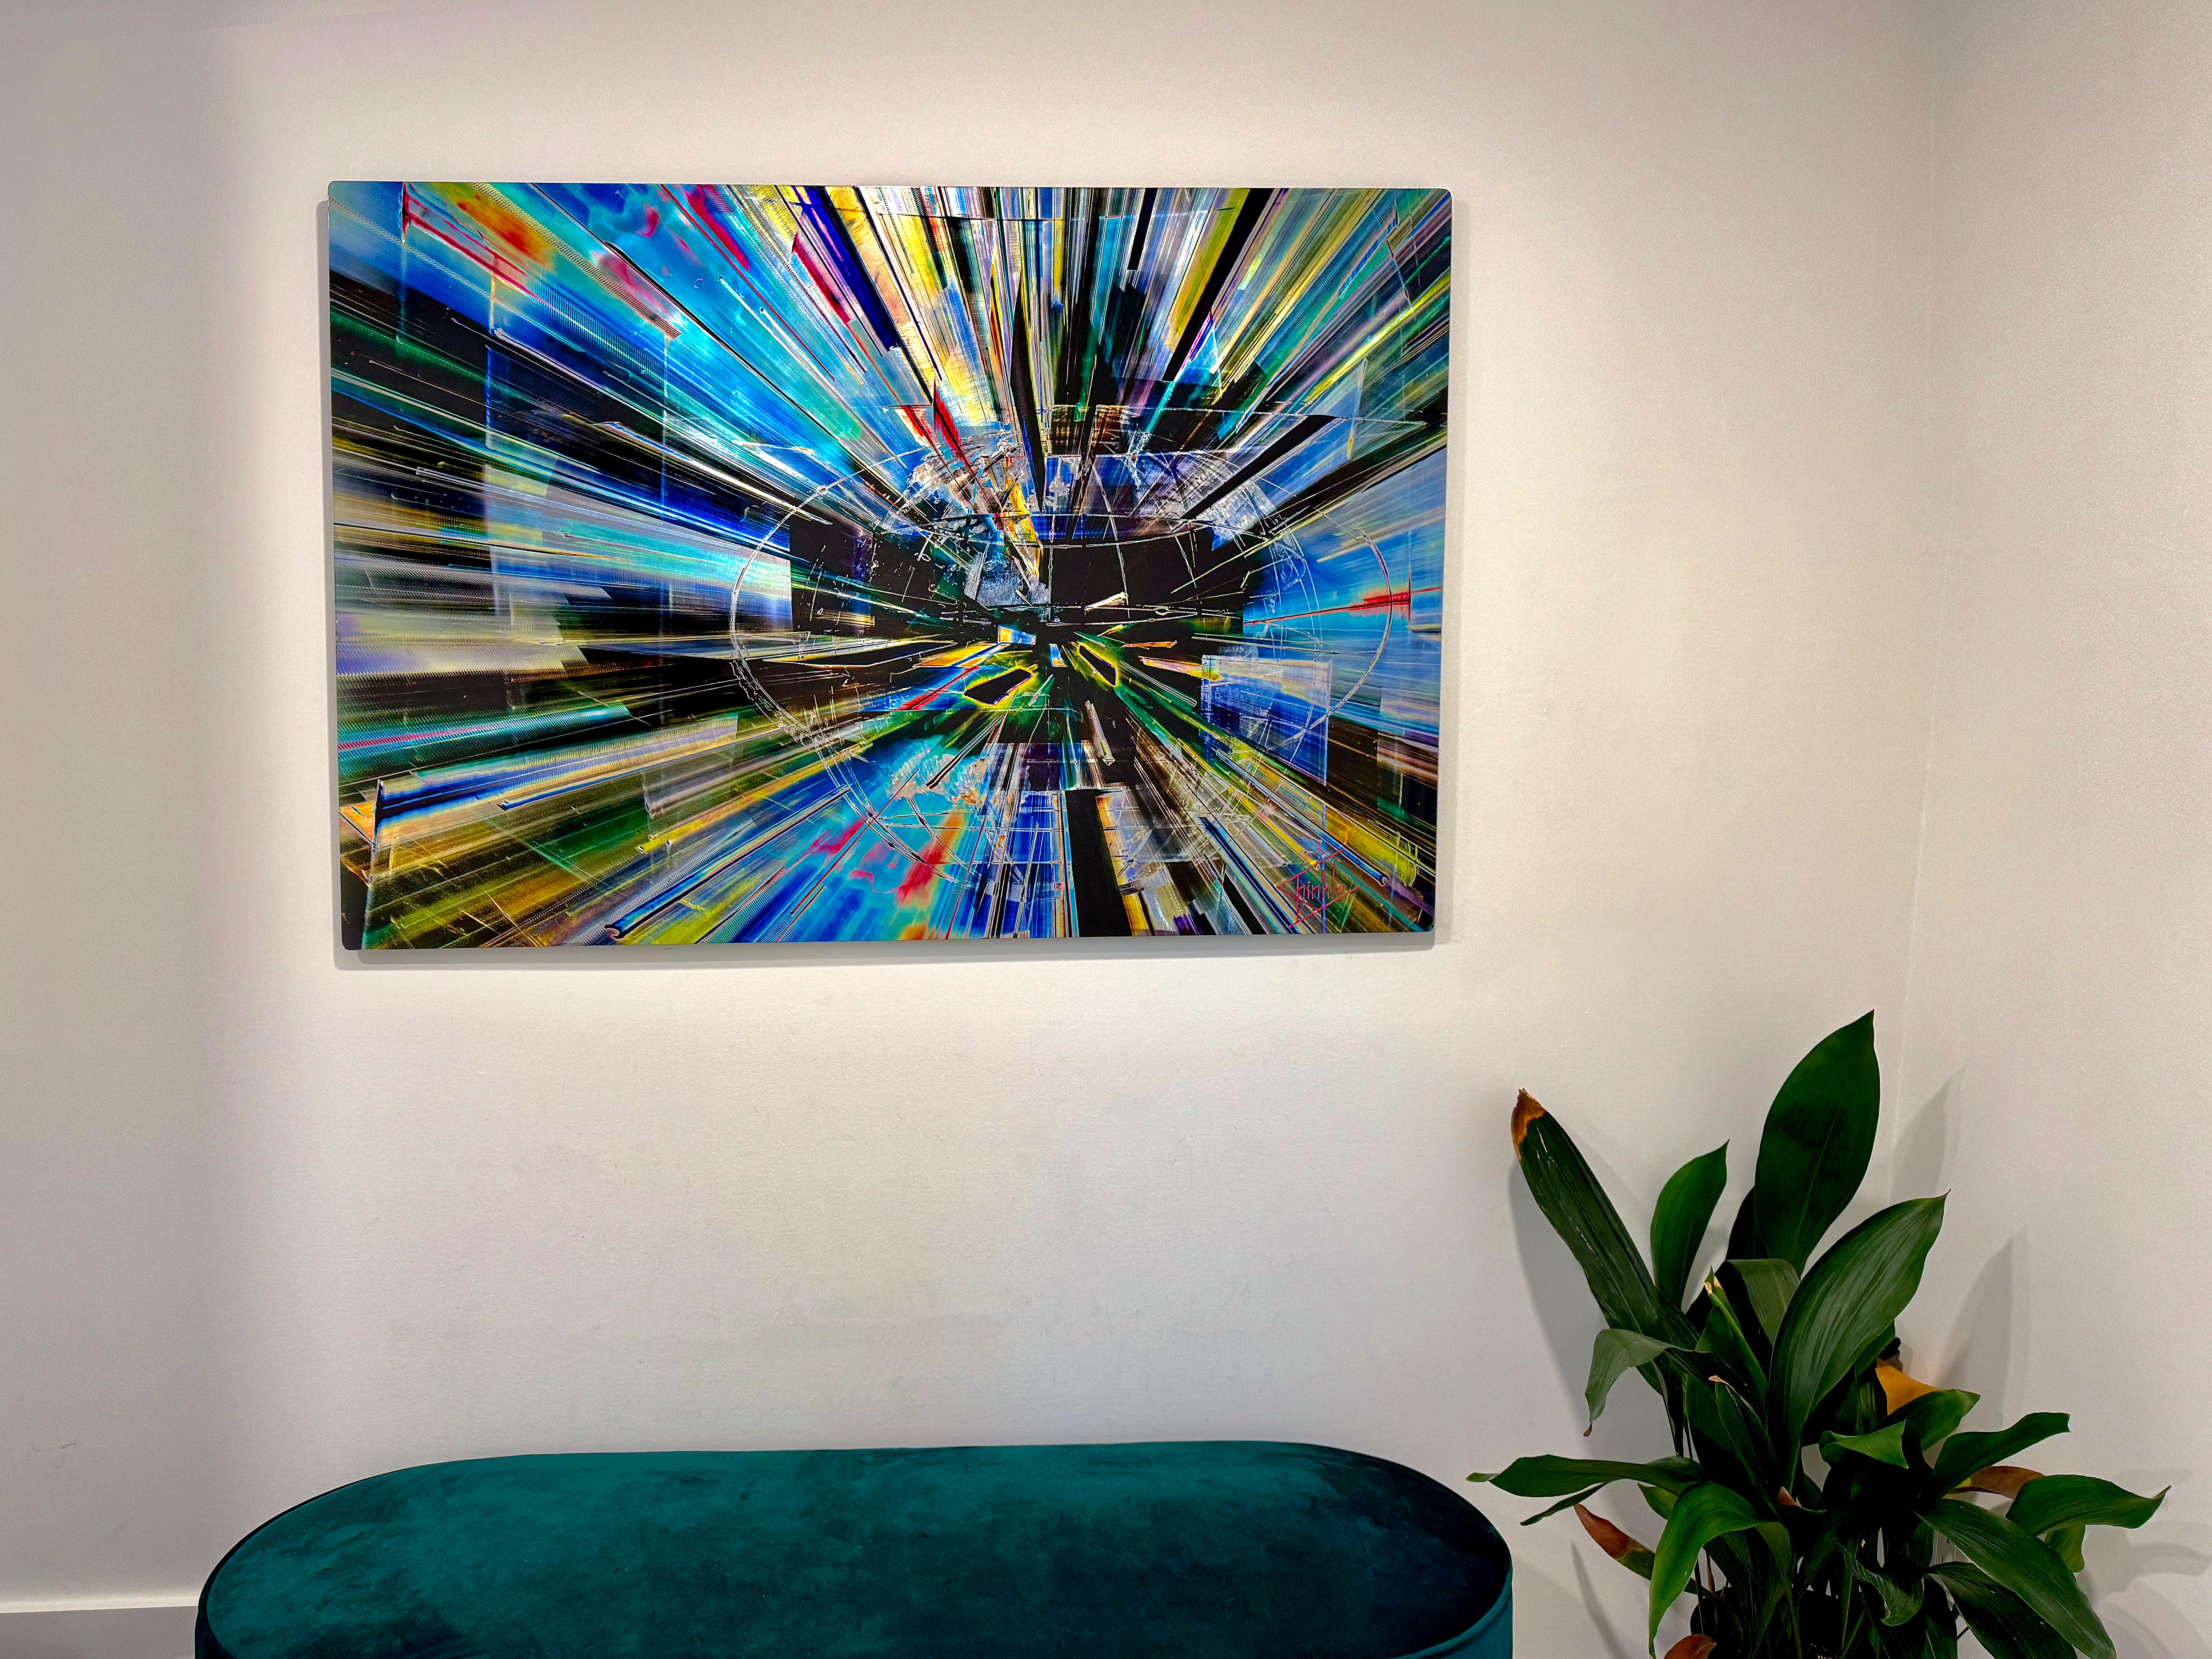 A faintly discernible globe of planet Earth can be found in this work inspiring dialog on where one might traverse via the world wide web. The original image, inspired by the Port of Miami FL globe, pays homage to transportation in our physical